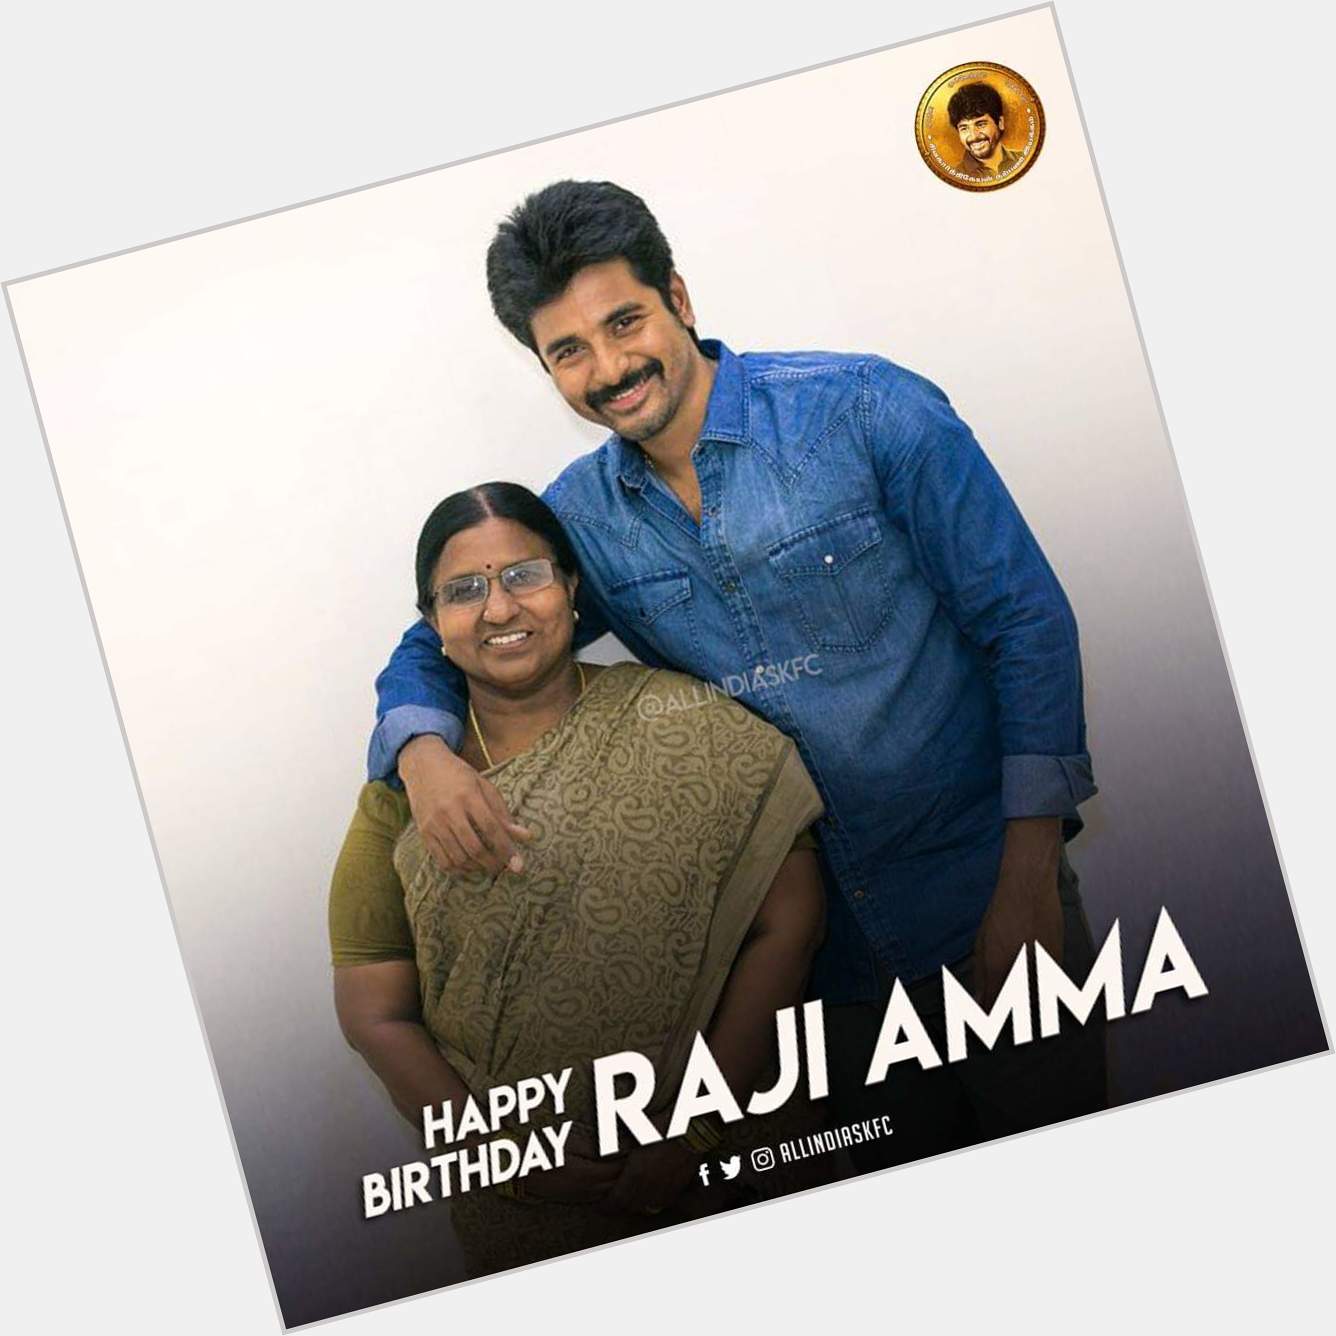 Happy birthday amma wishes on behalf of our  fans 